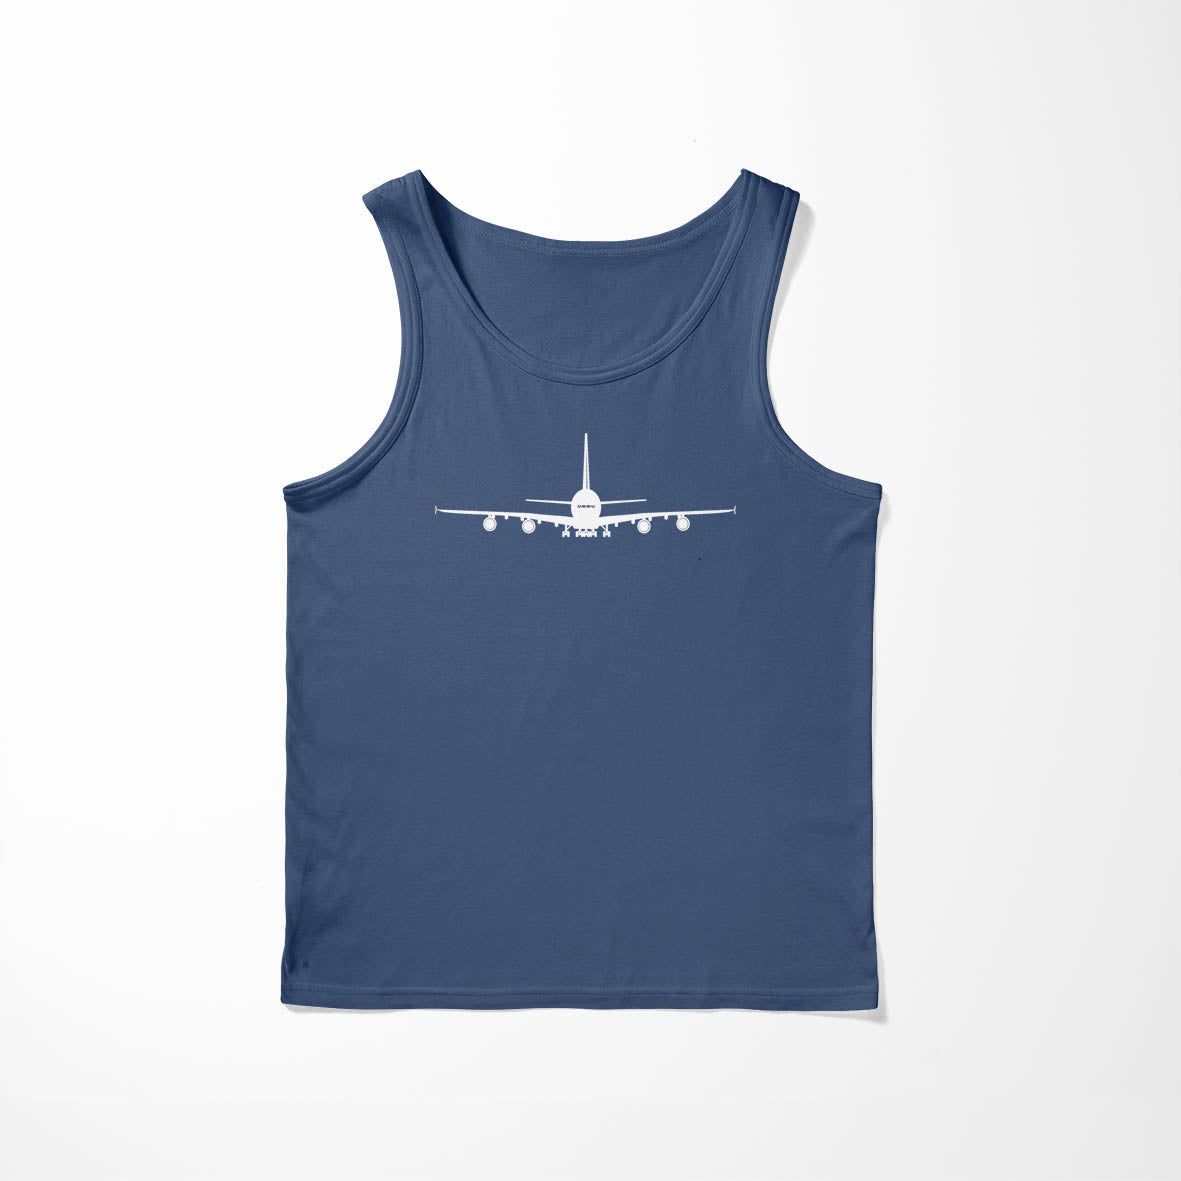 Airbus A380 Silhouette Designed Tank Tops